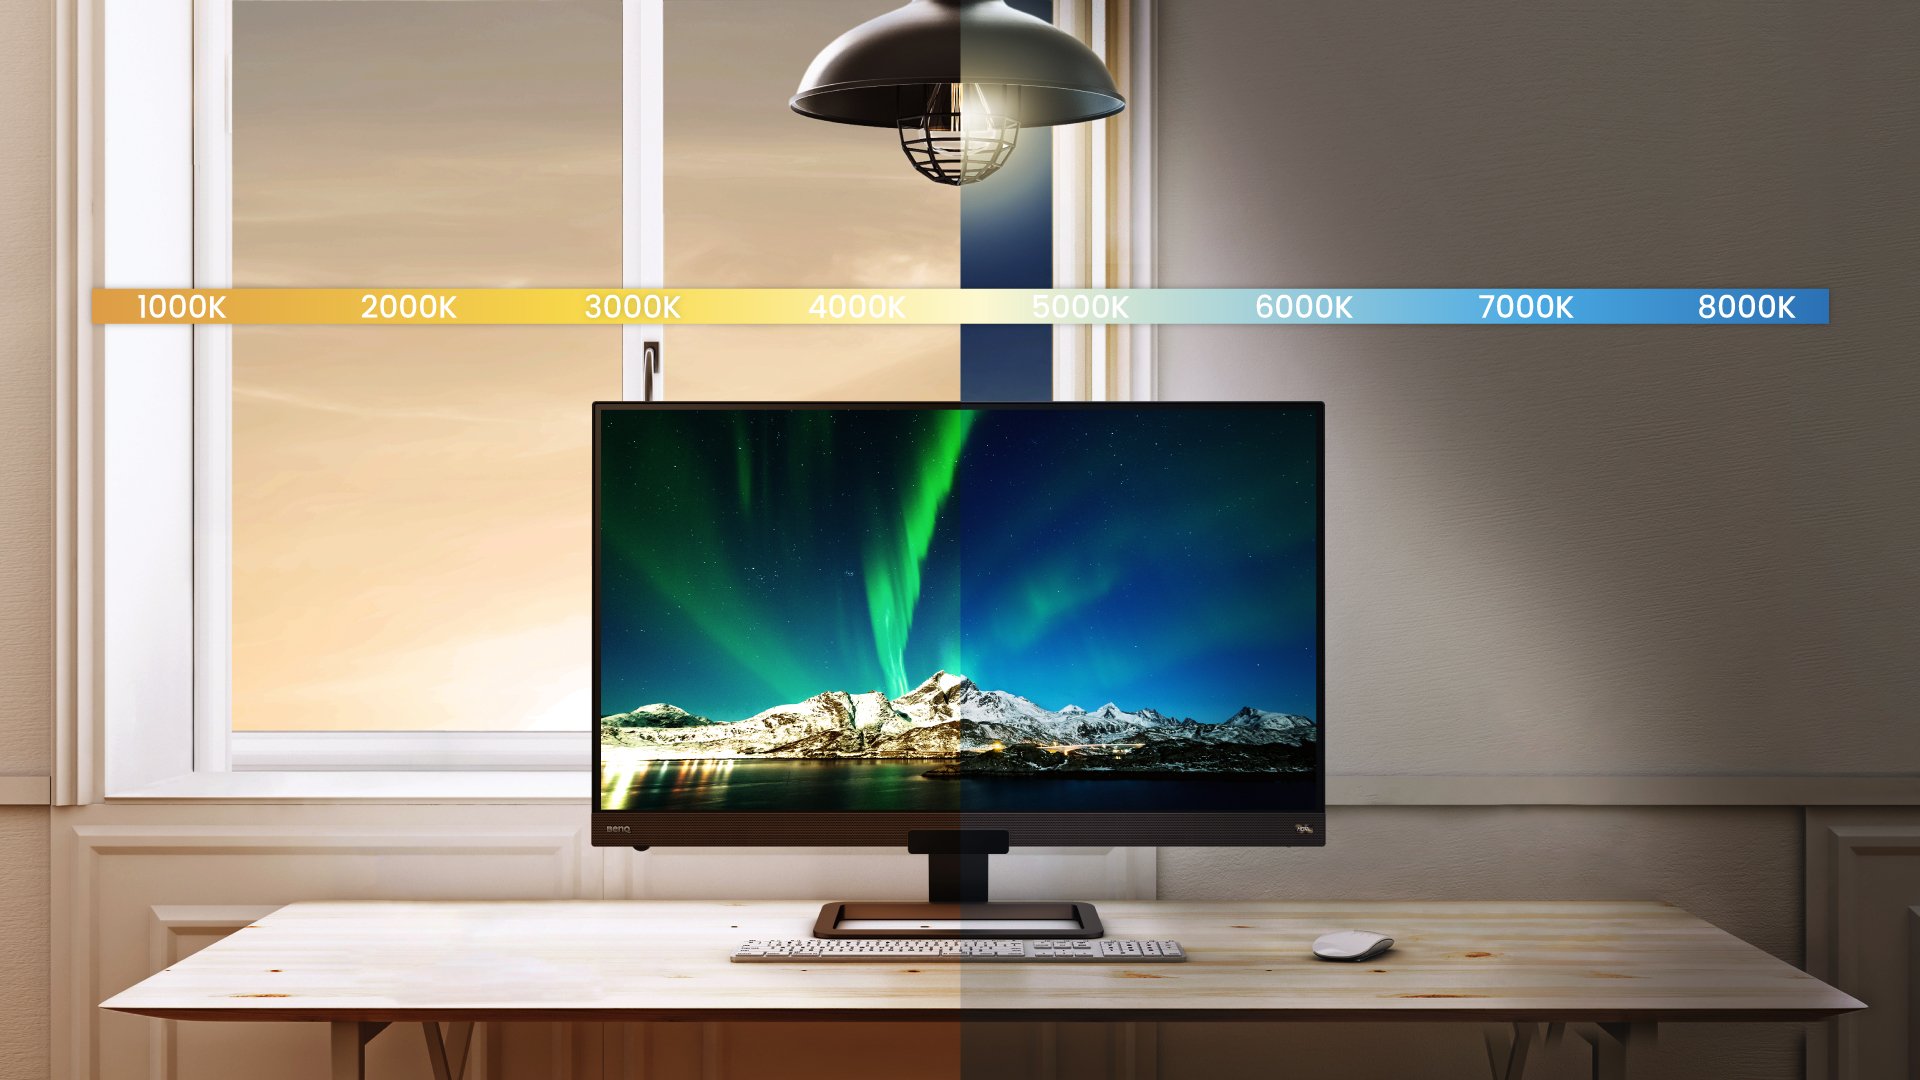 brightness intelligence plus adjusts display brightness and color temperature for your most comfortable viewing experience